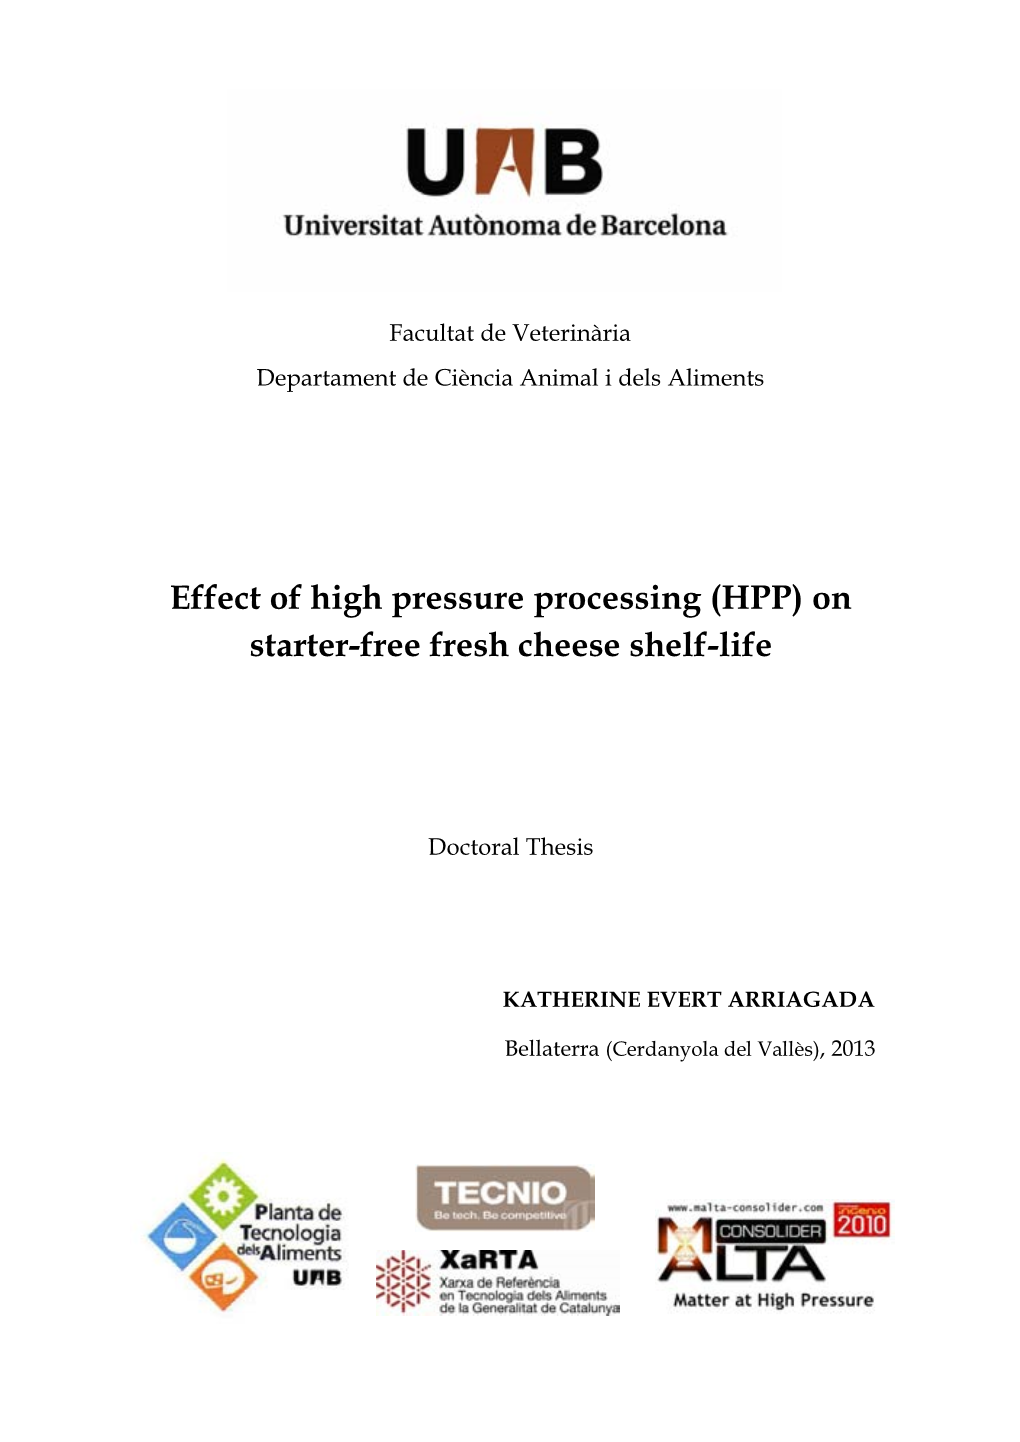 Effect of High Pressure Processing (HPP) on Starter-Free Fresh Cheese Shelf-Life